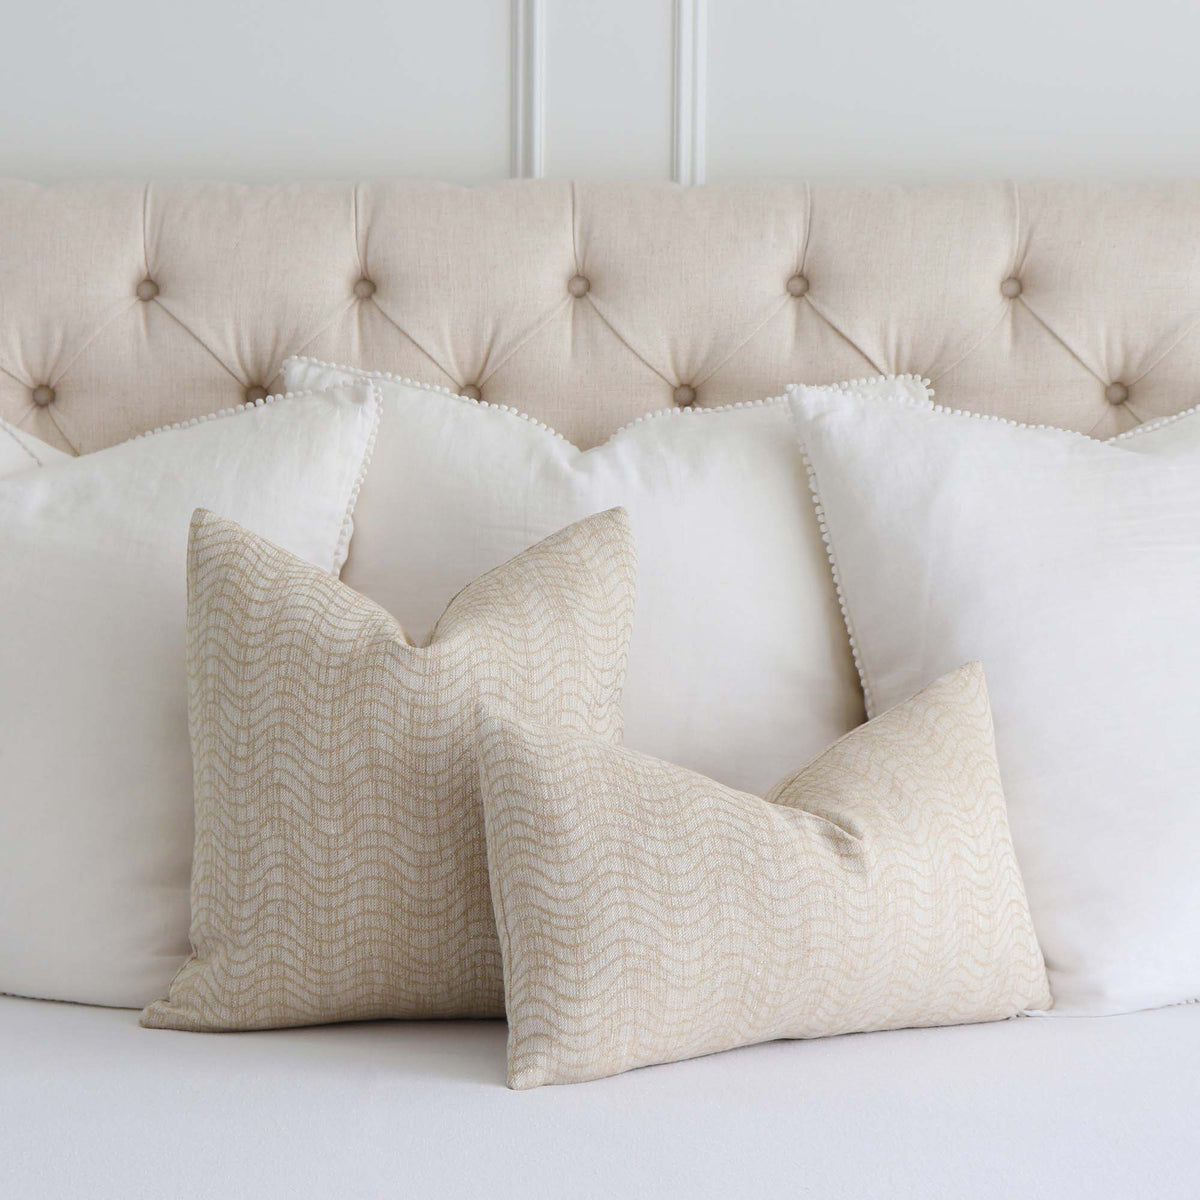 Chloe and Olive Designer Throw Pillows